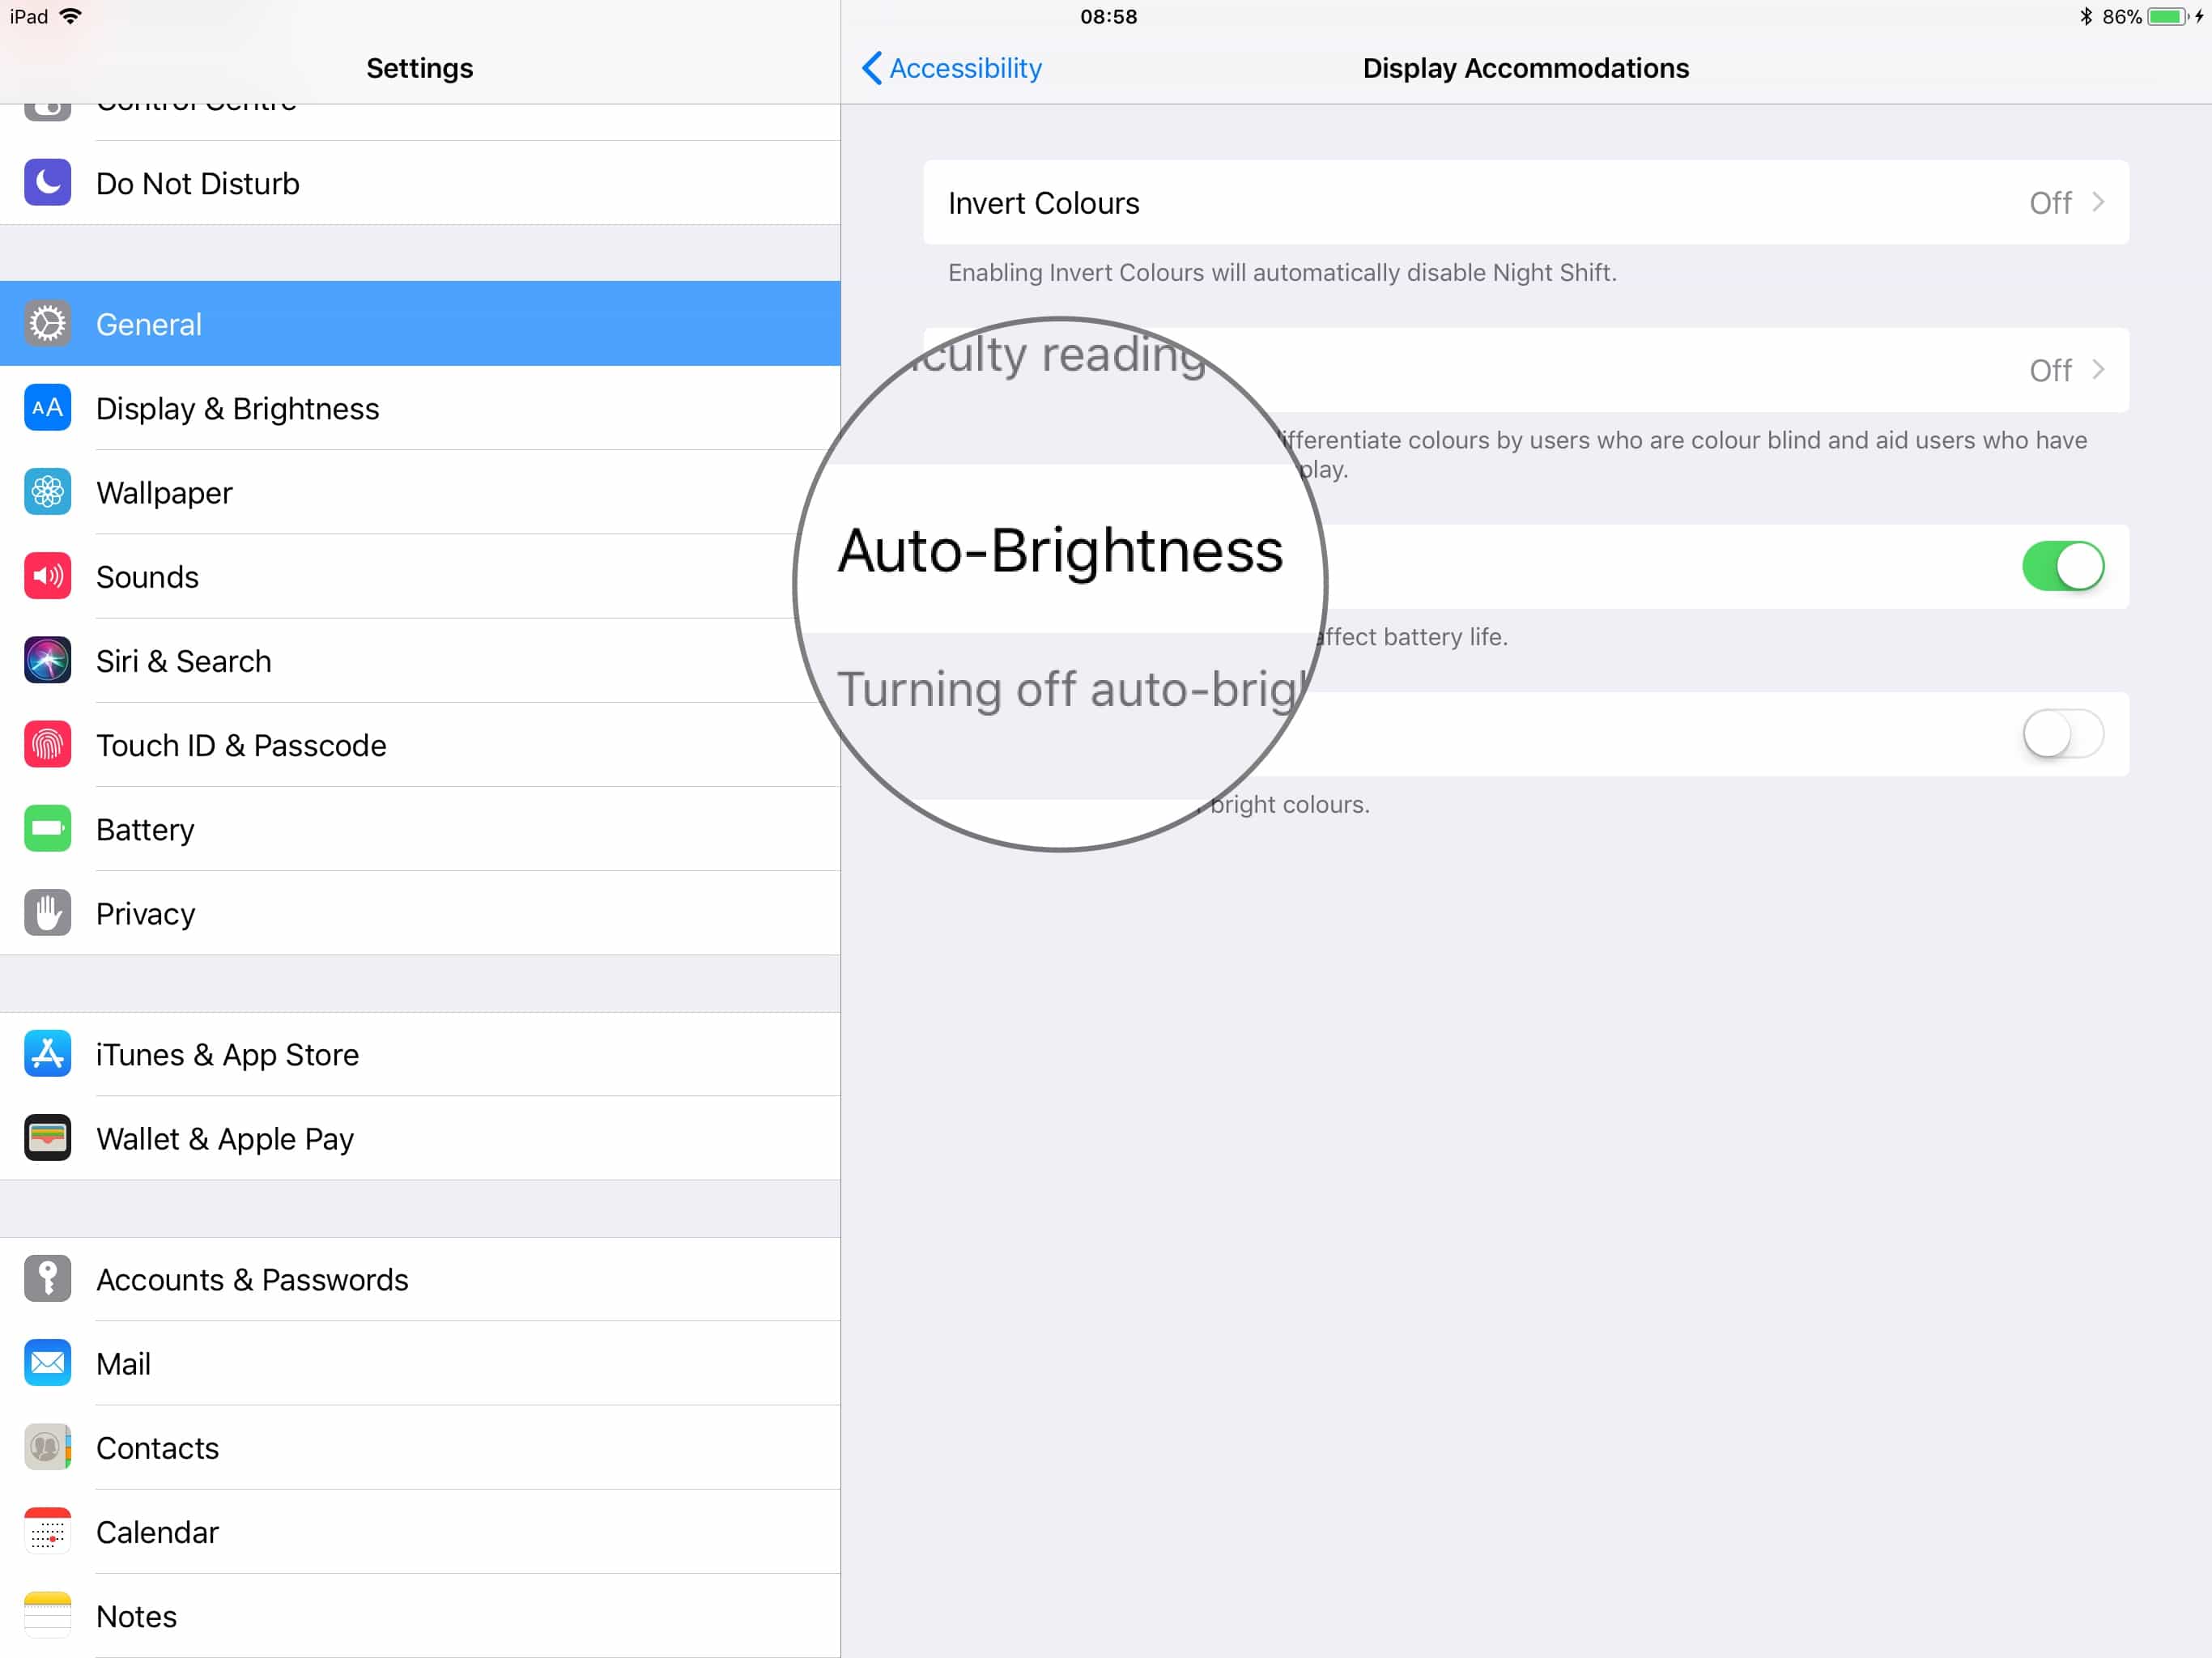 How to switch off Auto Brightness in iOS 11 | Cult of Mac